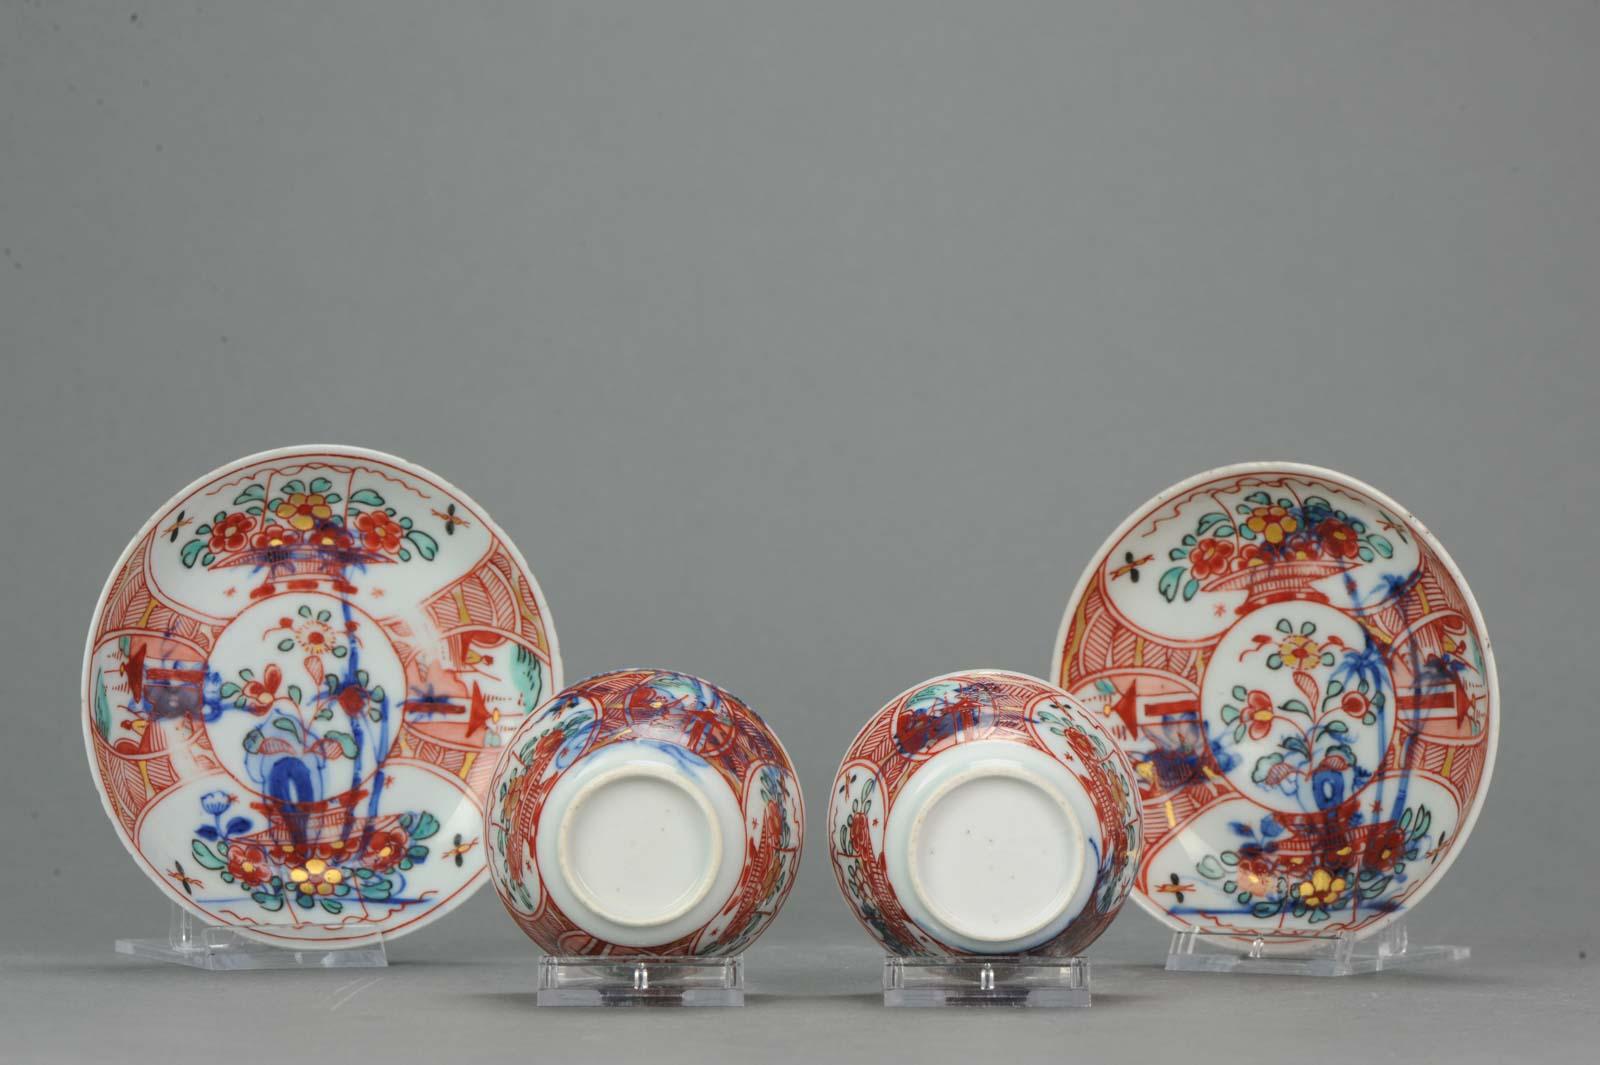 A very nice Set of 2 example Amsterdam bont cups and saucers with a lovely scene.

Additional information:
Material: Porcelain & Pottery
Type: Tea Bowls & Cups, Tea Drinking
Region of Origin: China
Country of Manufacturing: China
Period: 18th